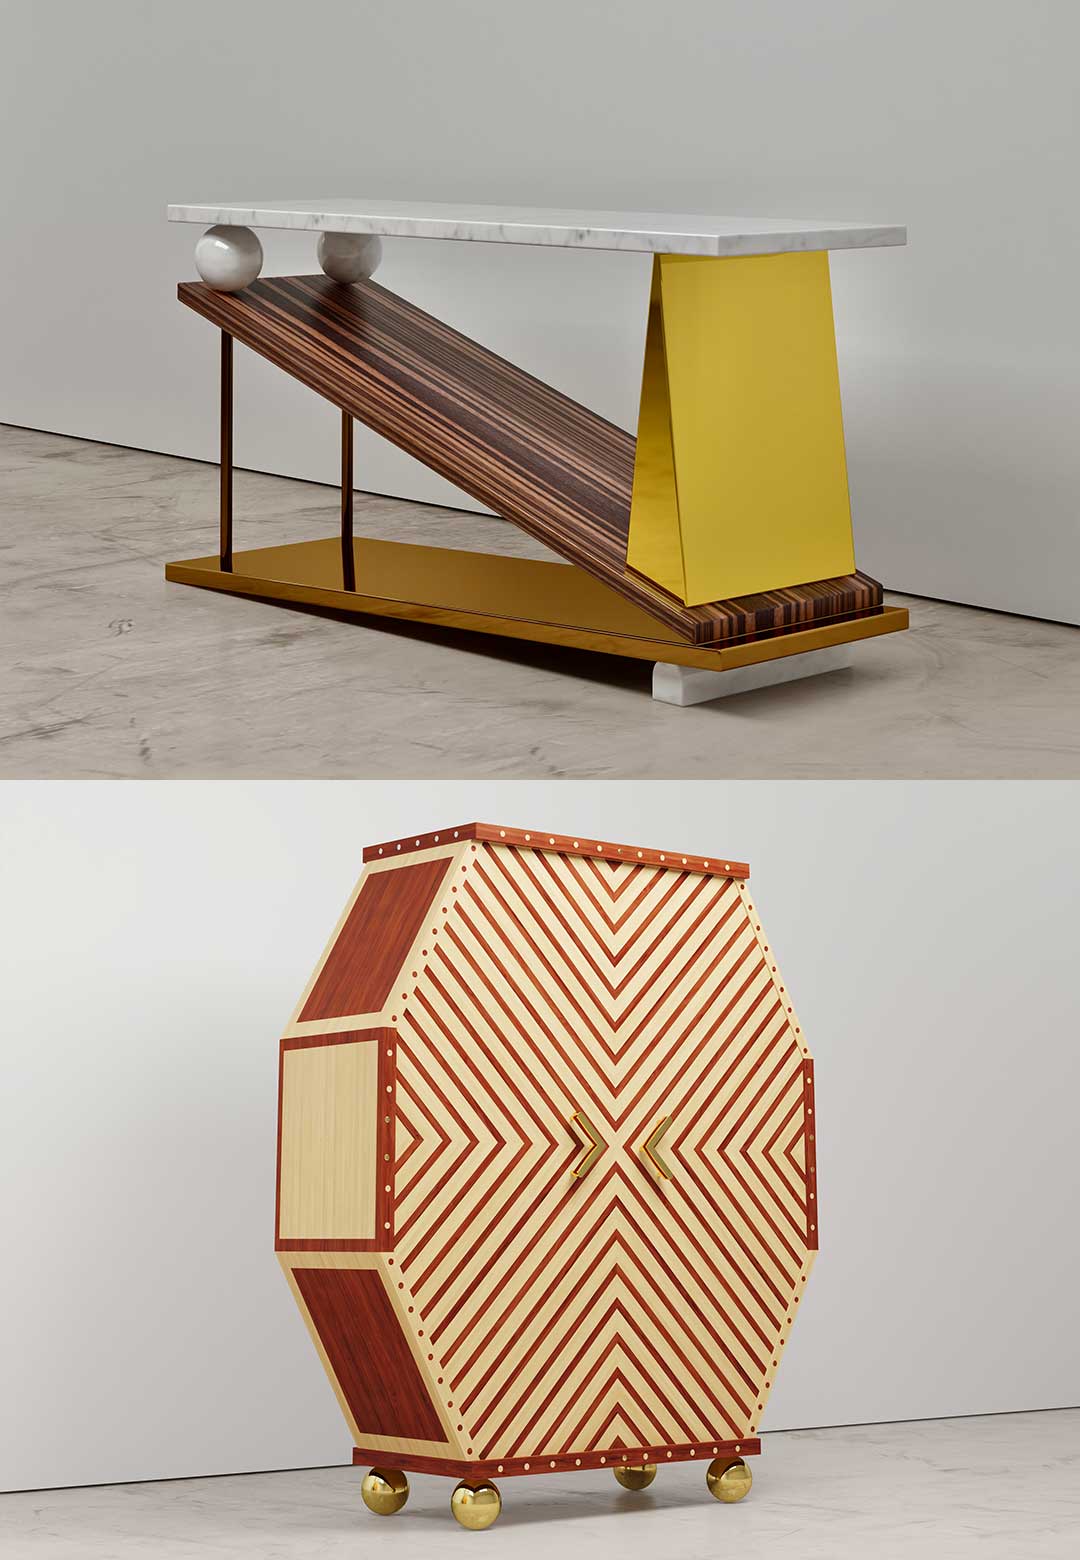 Troy Smith contrives eclectic furniture designs that joyously blend function with art